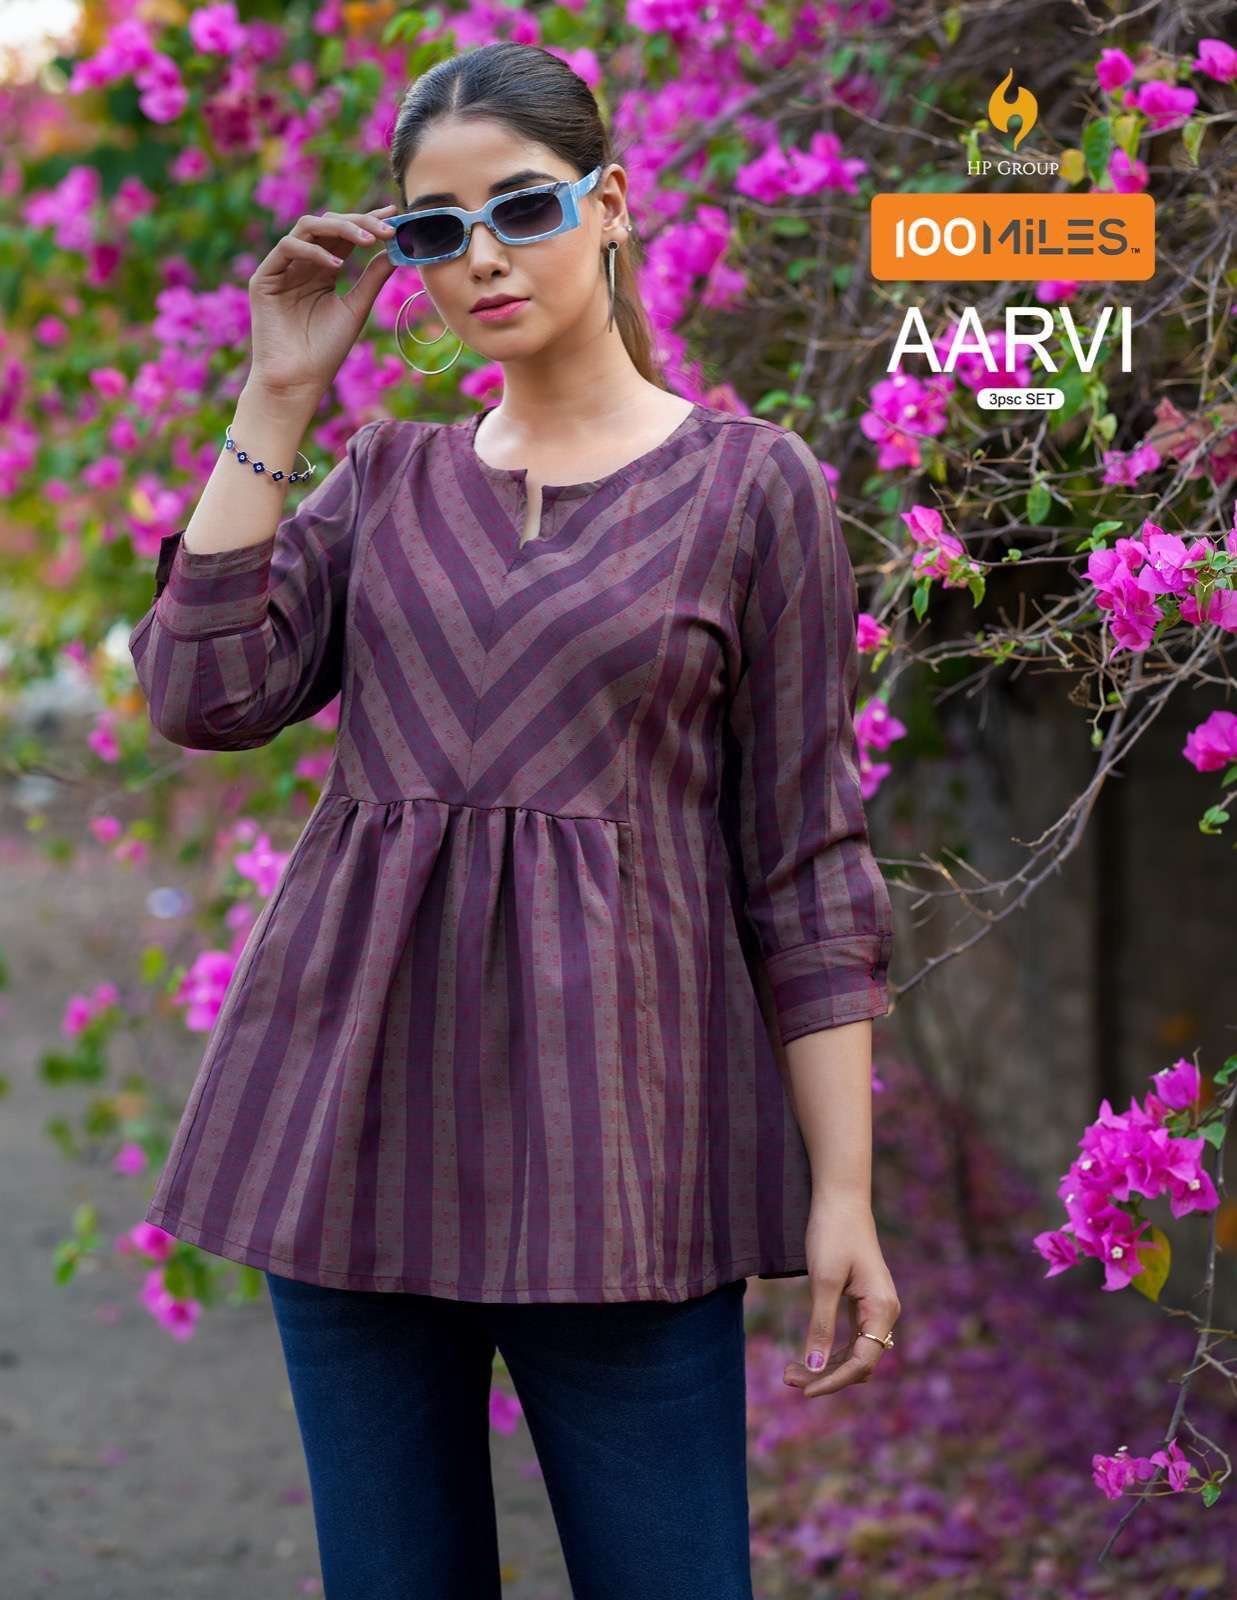 100 miles aarvi series 01-04 cotton blended tops 